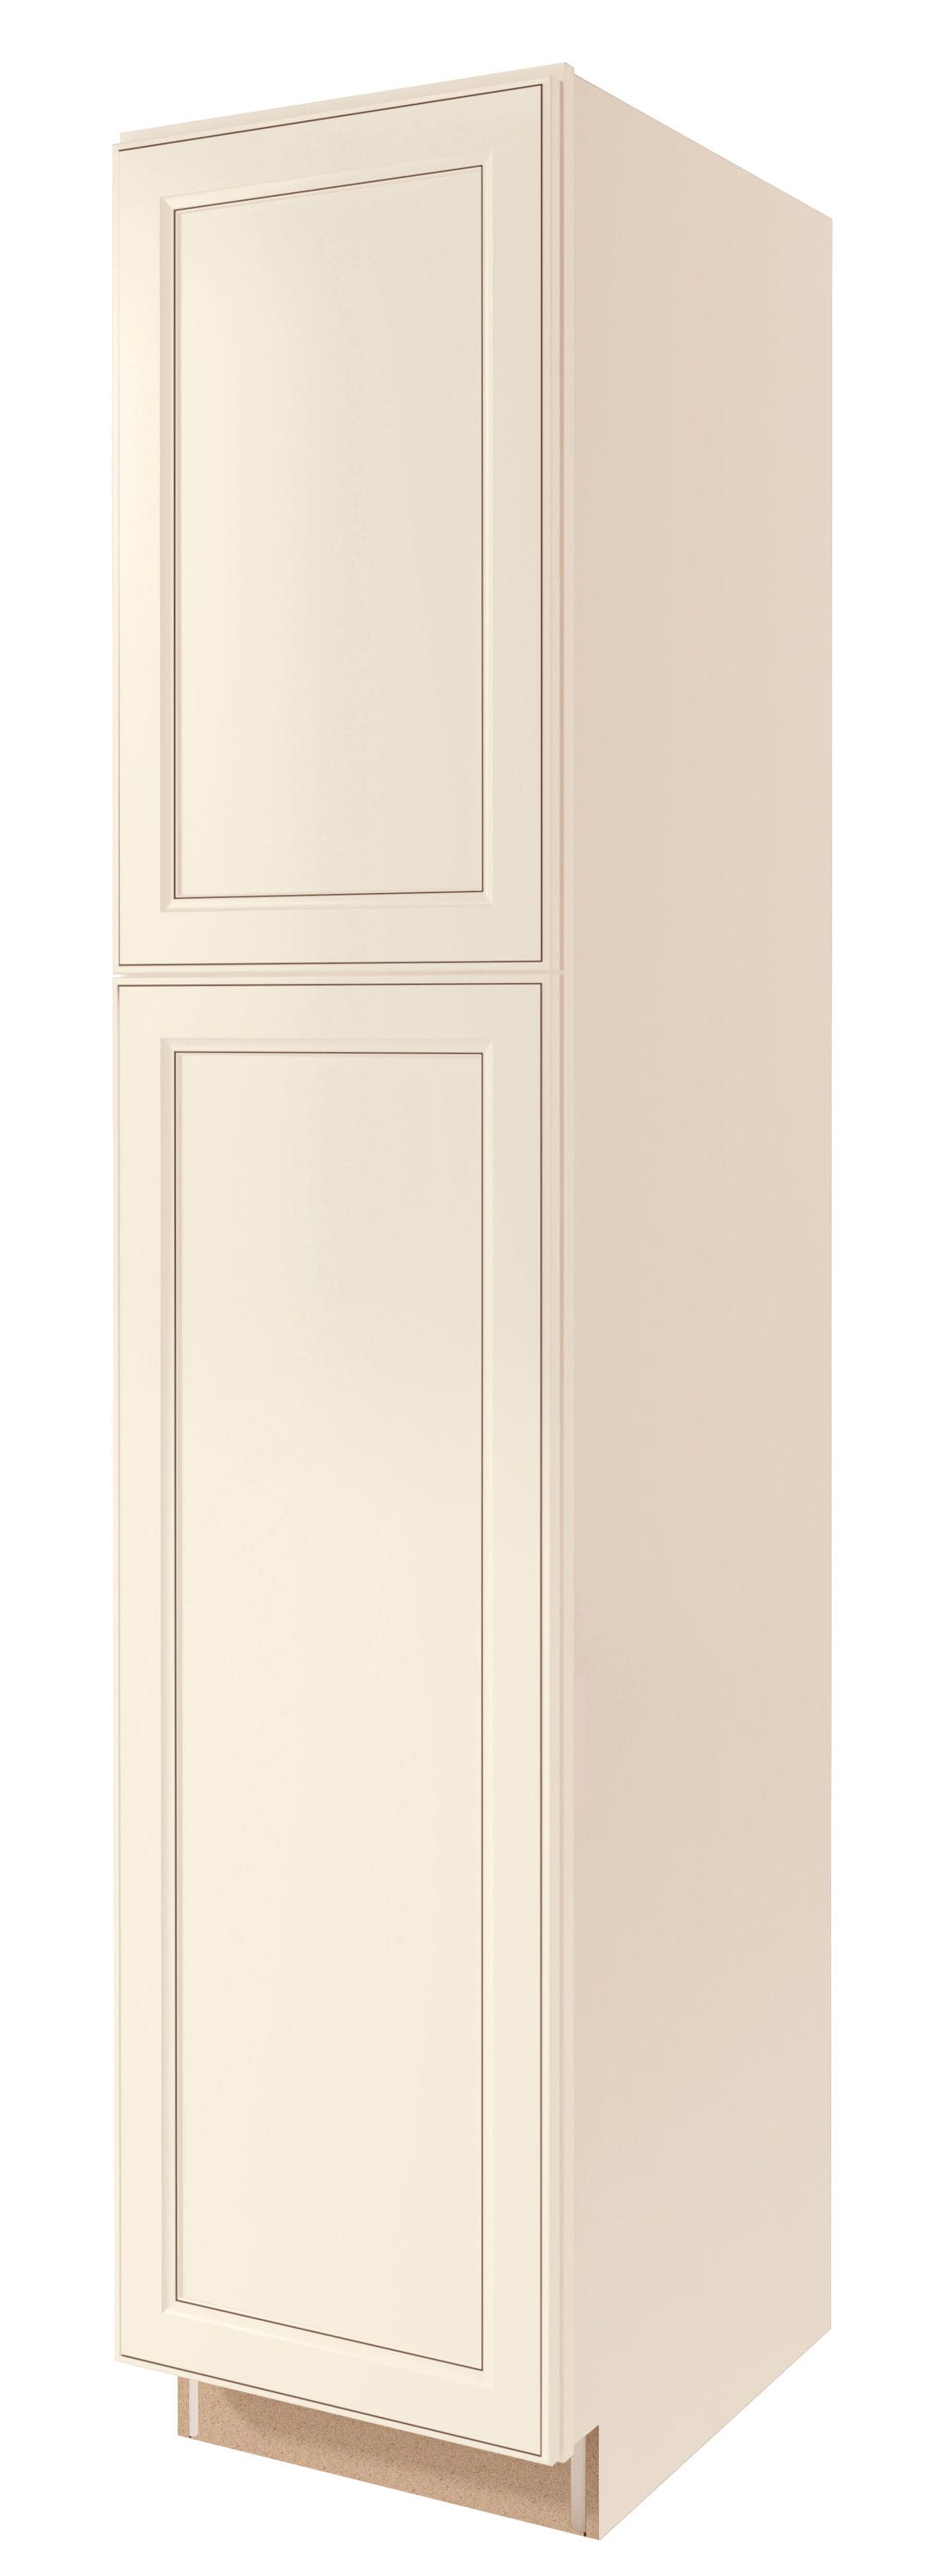 Cabinet Savers Part # 2424BCP - Cabinet Savers Beige 24 In. X 24